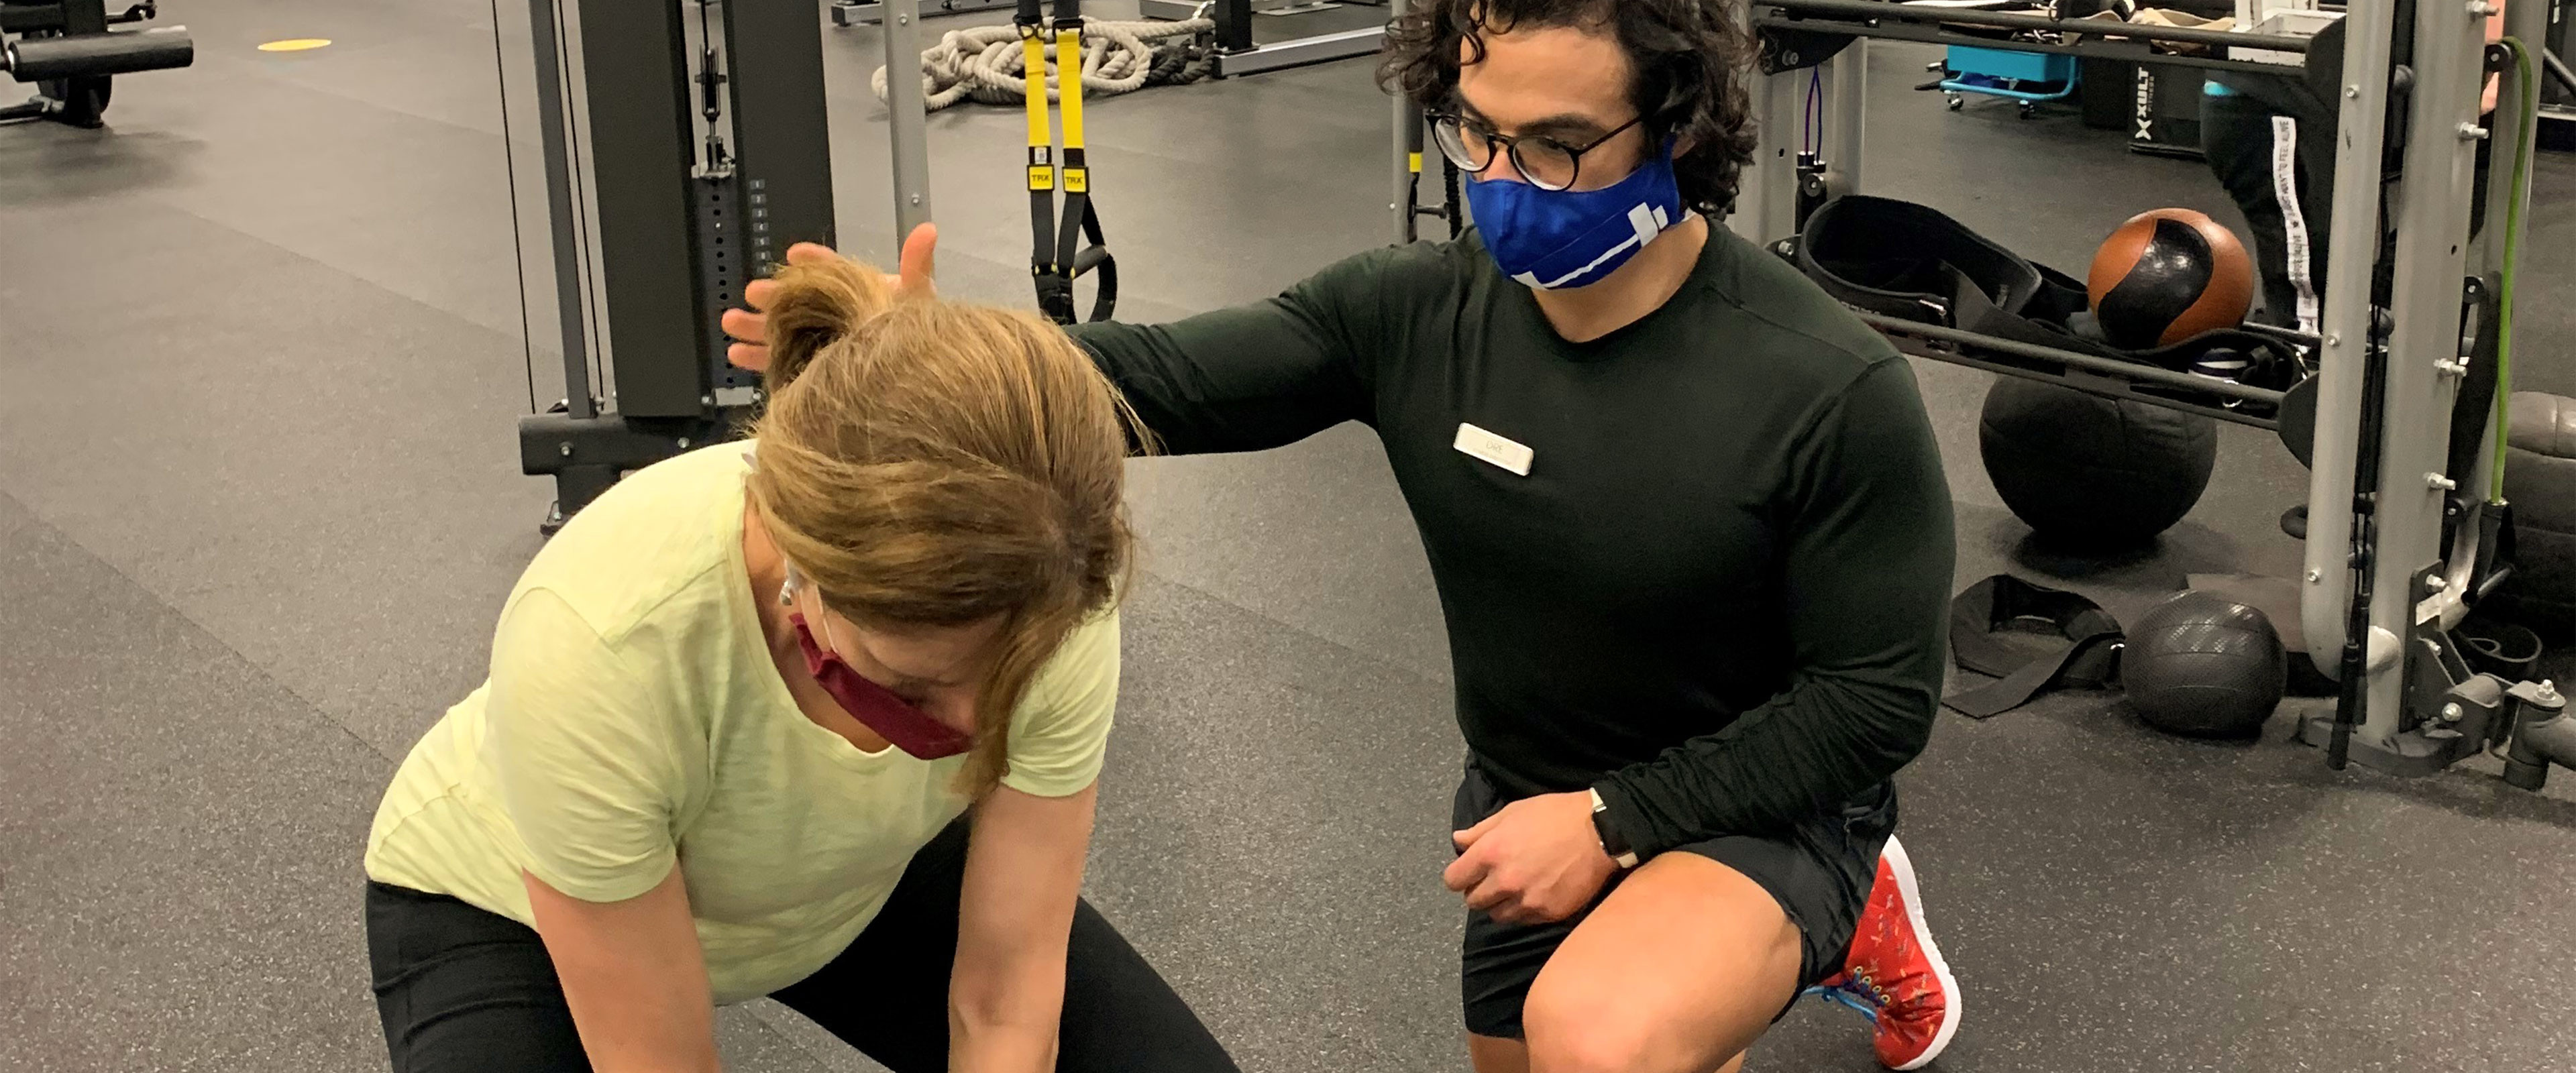 Personal trainer assisting a middle aged women with workout